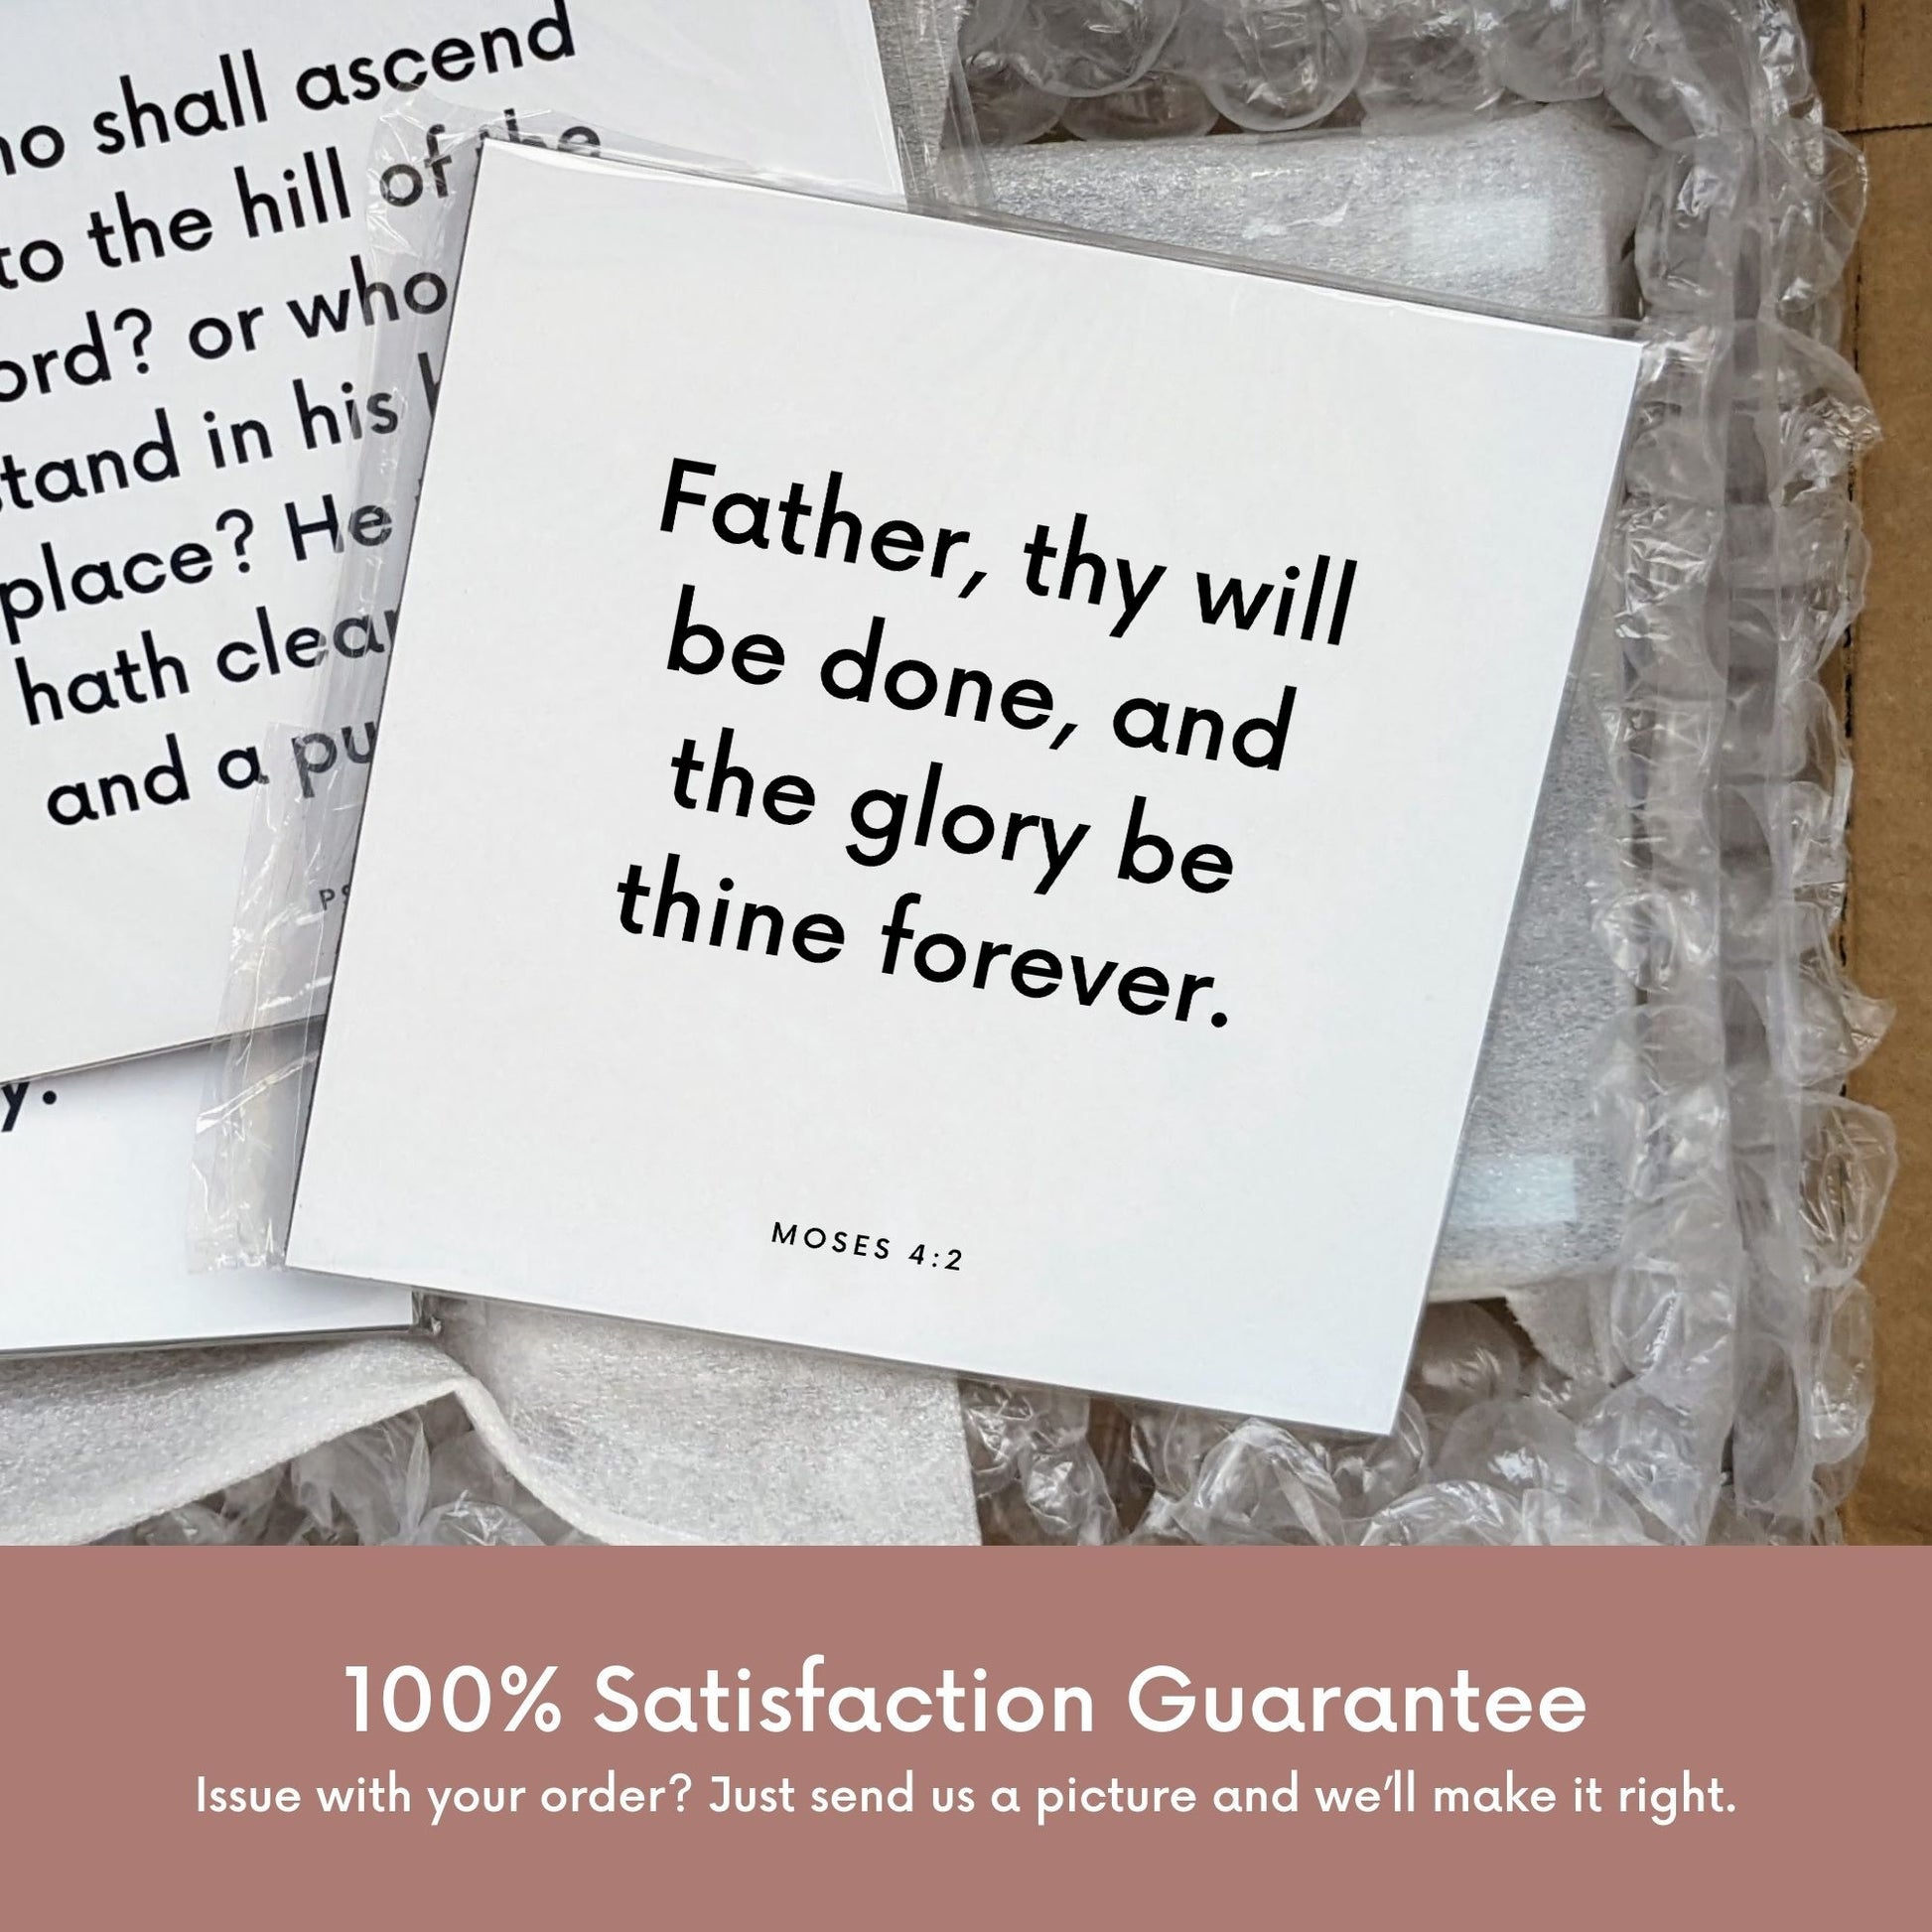 Shipping materials for scripture tile of Moses 4:2 - "Father, thy will be done, and the glory be thine forever"